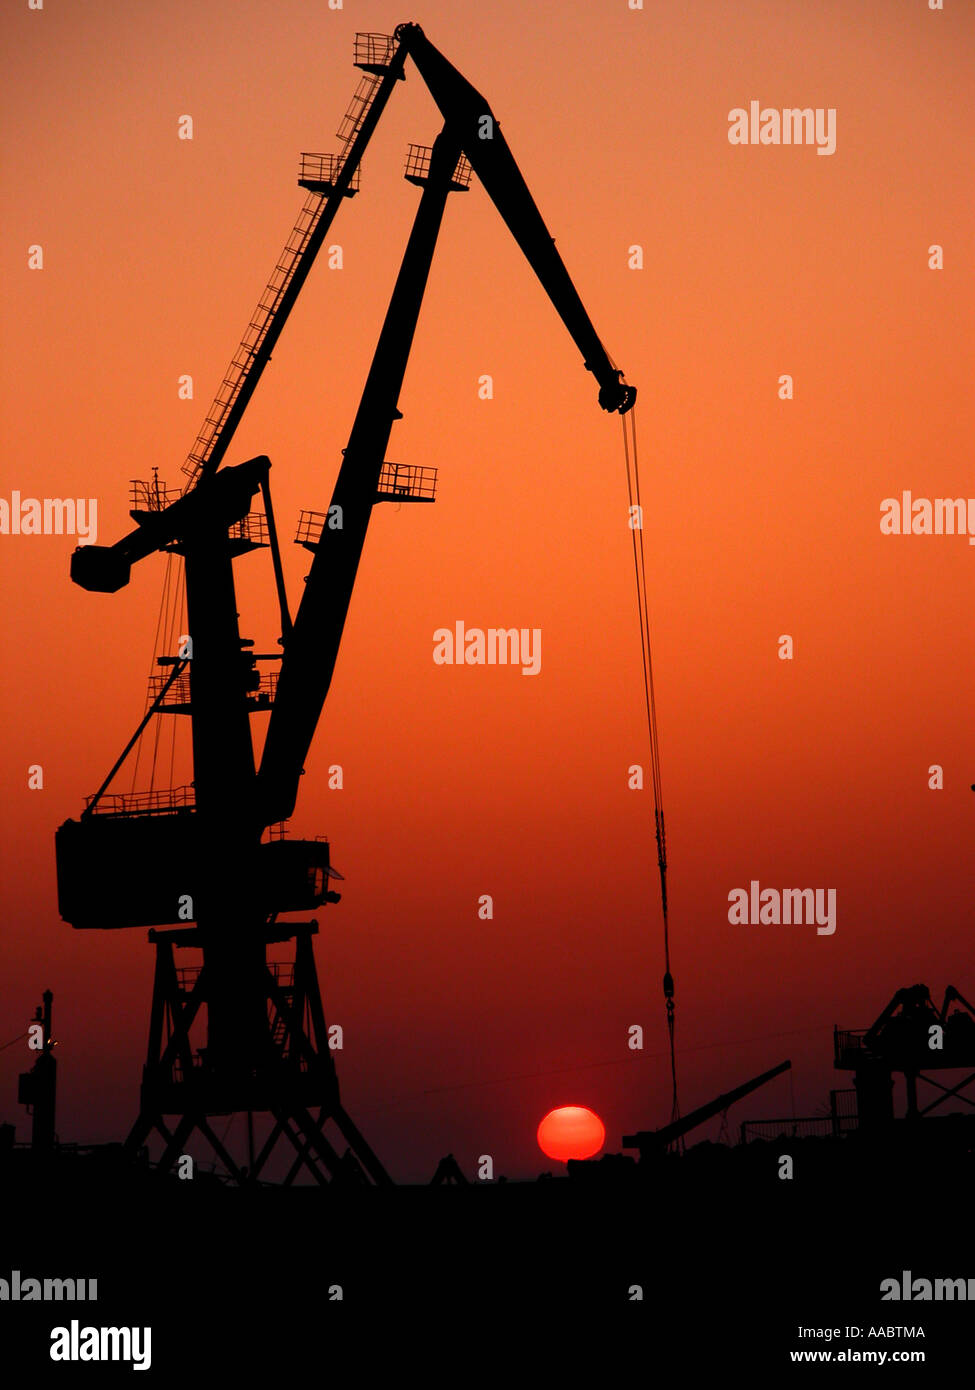 oil pump at afterglow / sunset Stock Photo